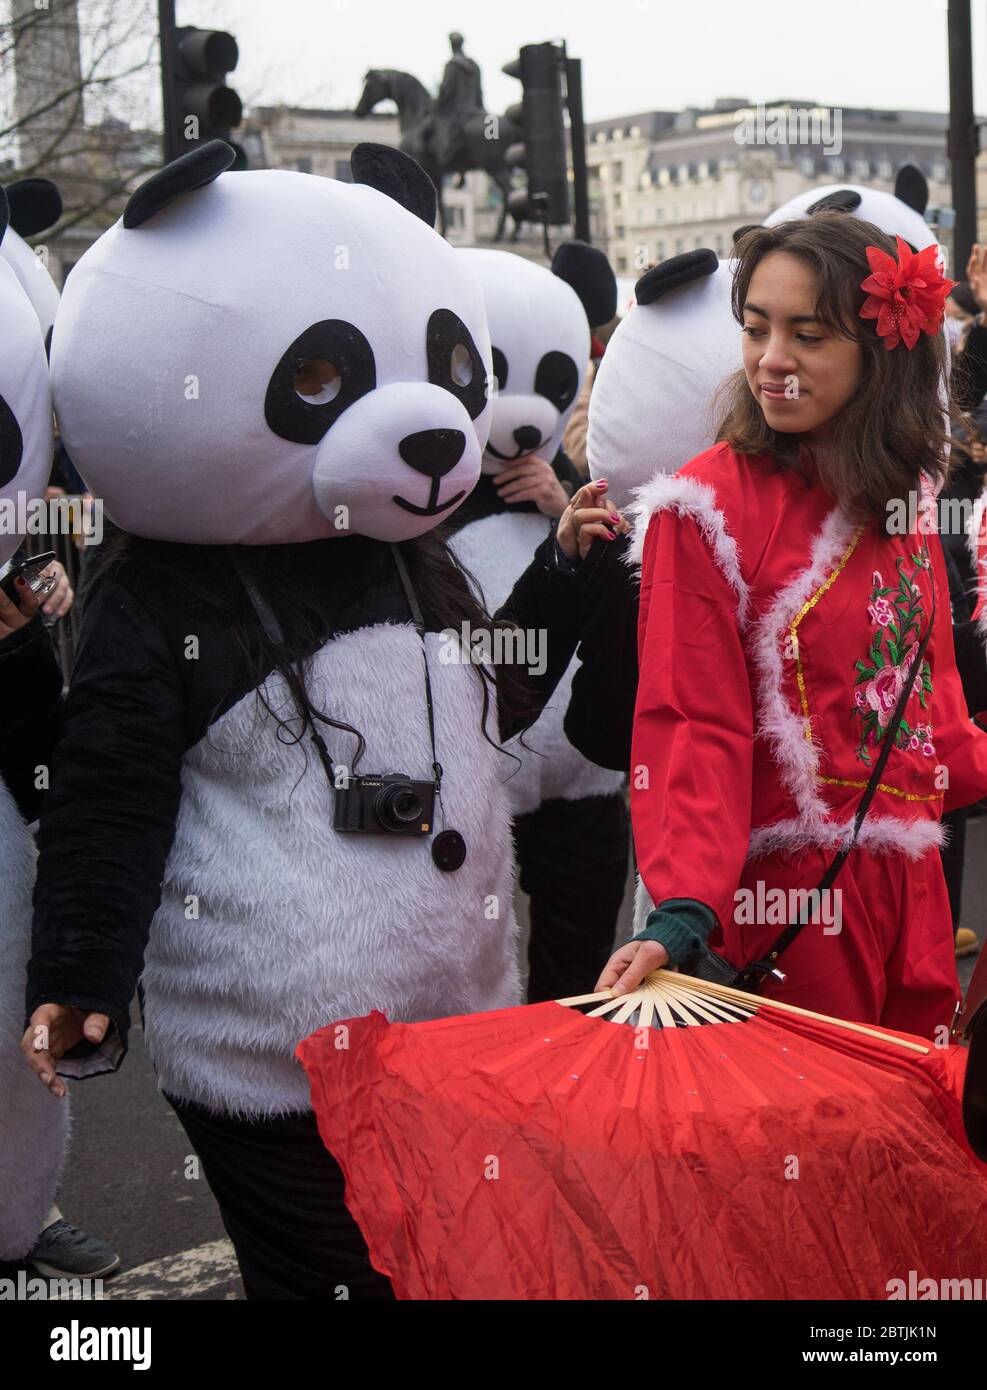 Lady in red costume next to people dressed as pandas. Chinese New Year Celebration Parade. London Stock Photo